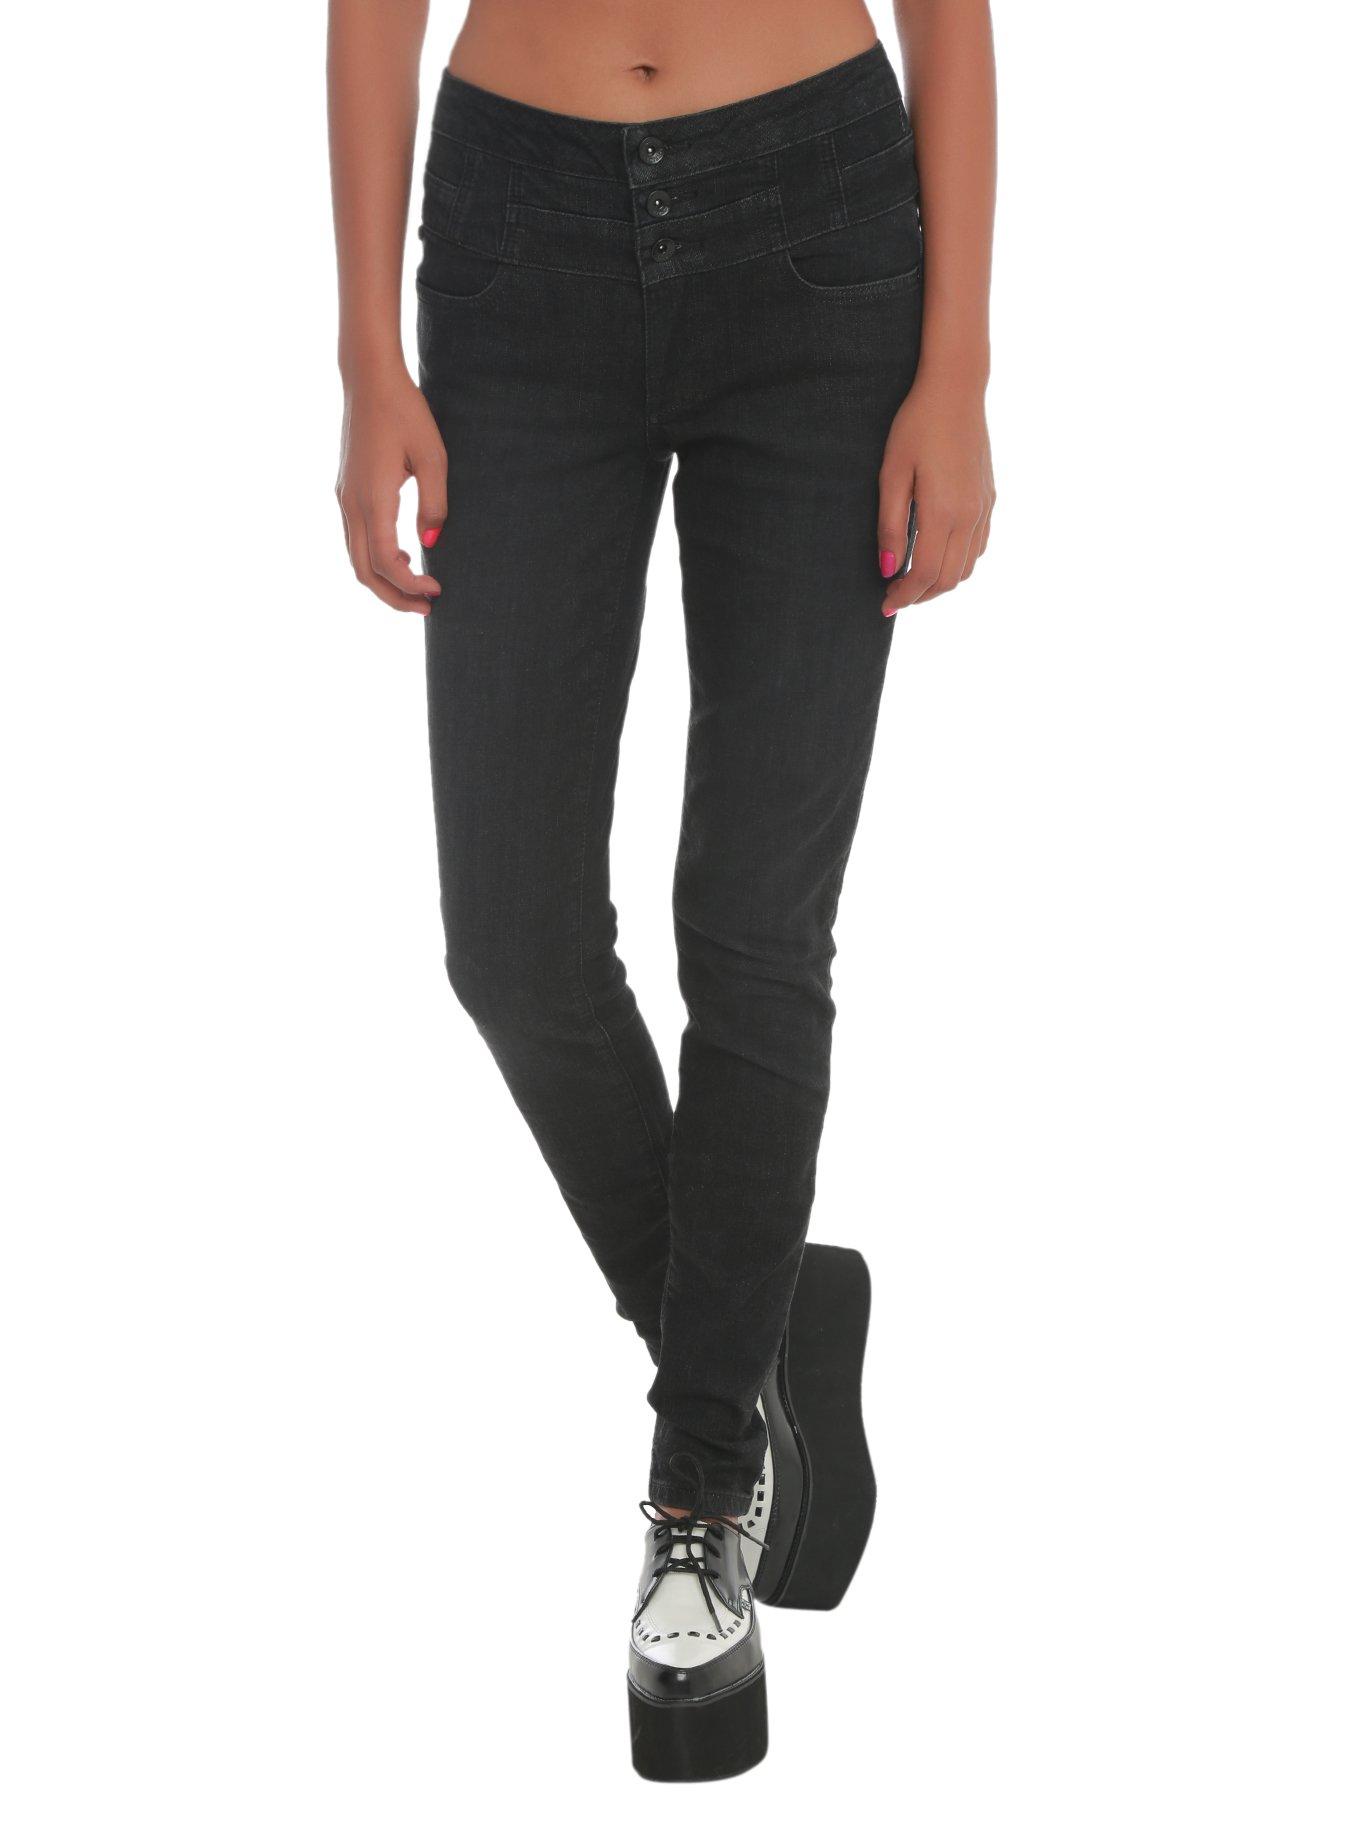 LOVEsick Black High-Waisted Skinny Jeans | Hot Topic